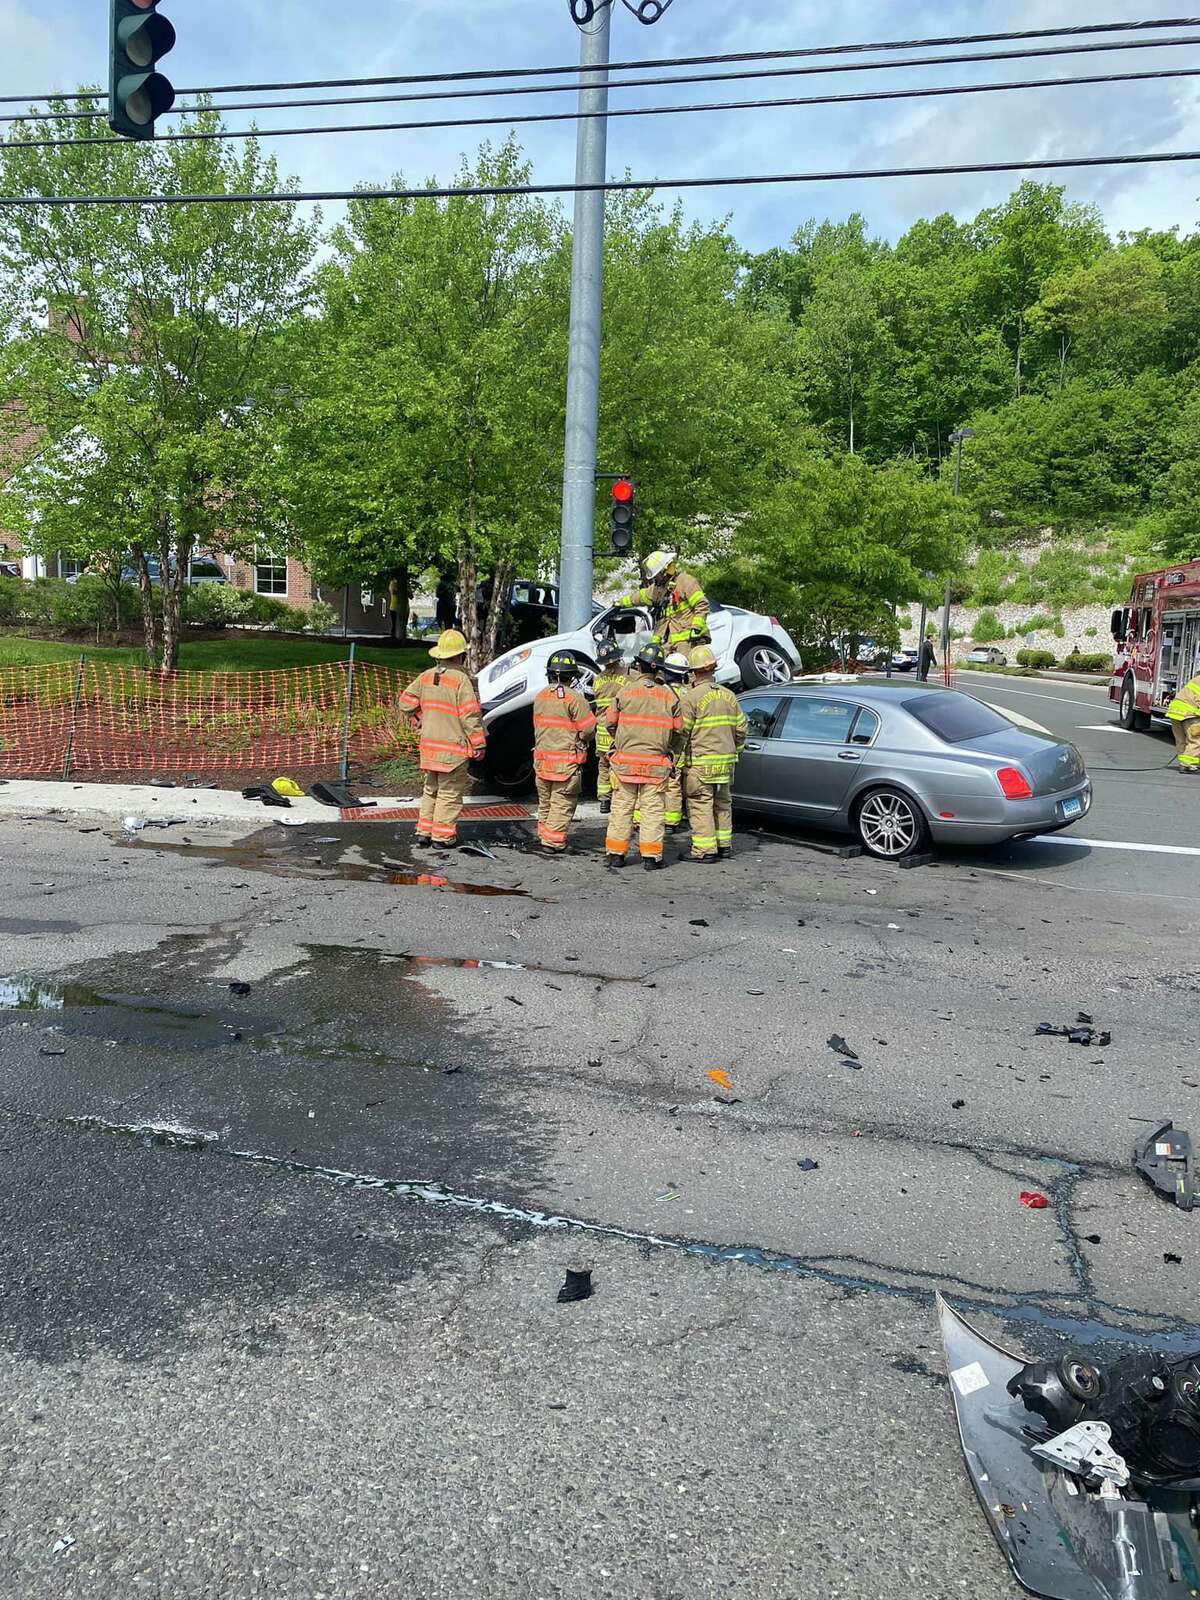 Three patients were taken to the hospital Thursday morning after a three-car crash on Federal Road in Brookfield Thursday morning. Firefighters had to free one of the drivers trapped in their car.